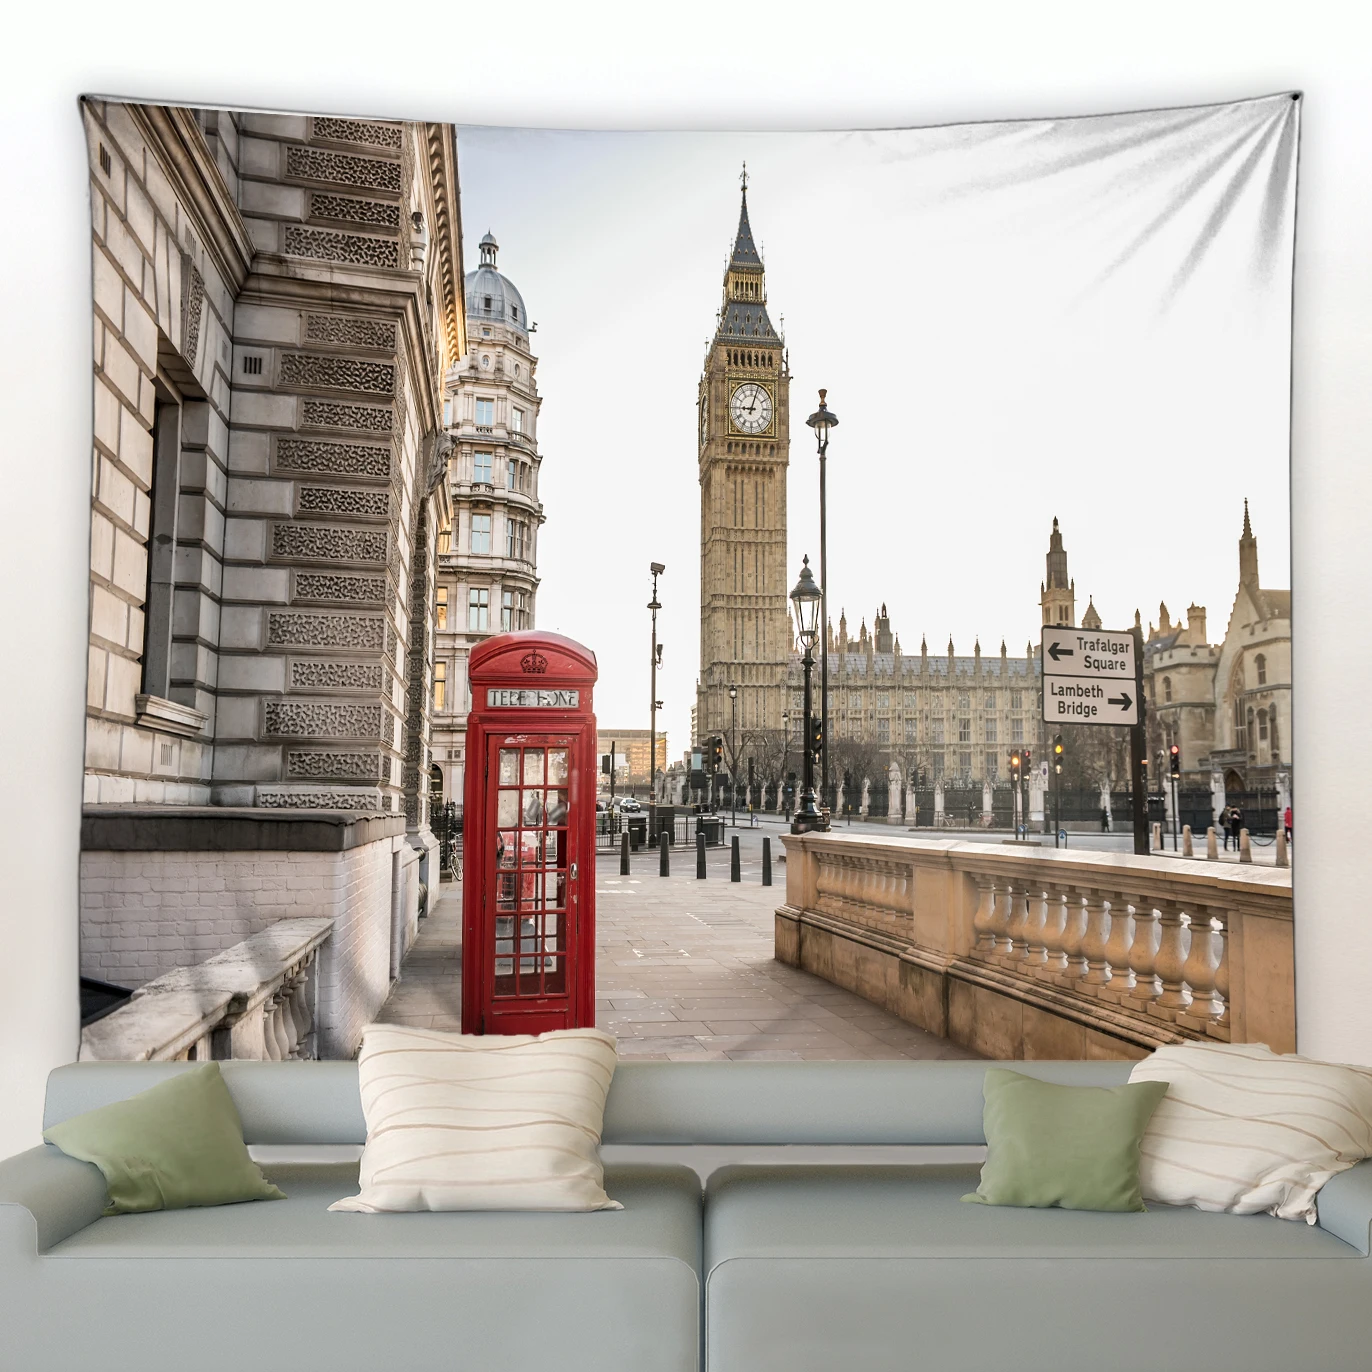 

Retro Big Ben Red Telephone Booth Tapestry London Street Scenery Modern Fabric Wall Hanging Living Room Bedroom Courtyard Decor